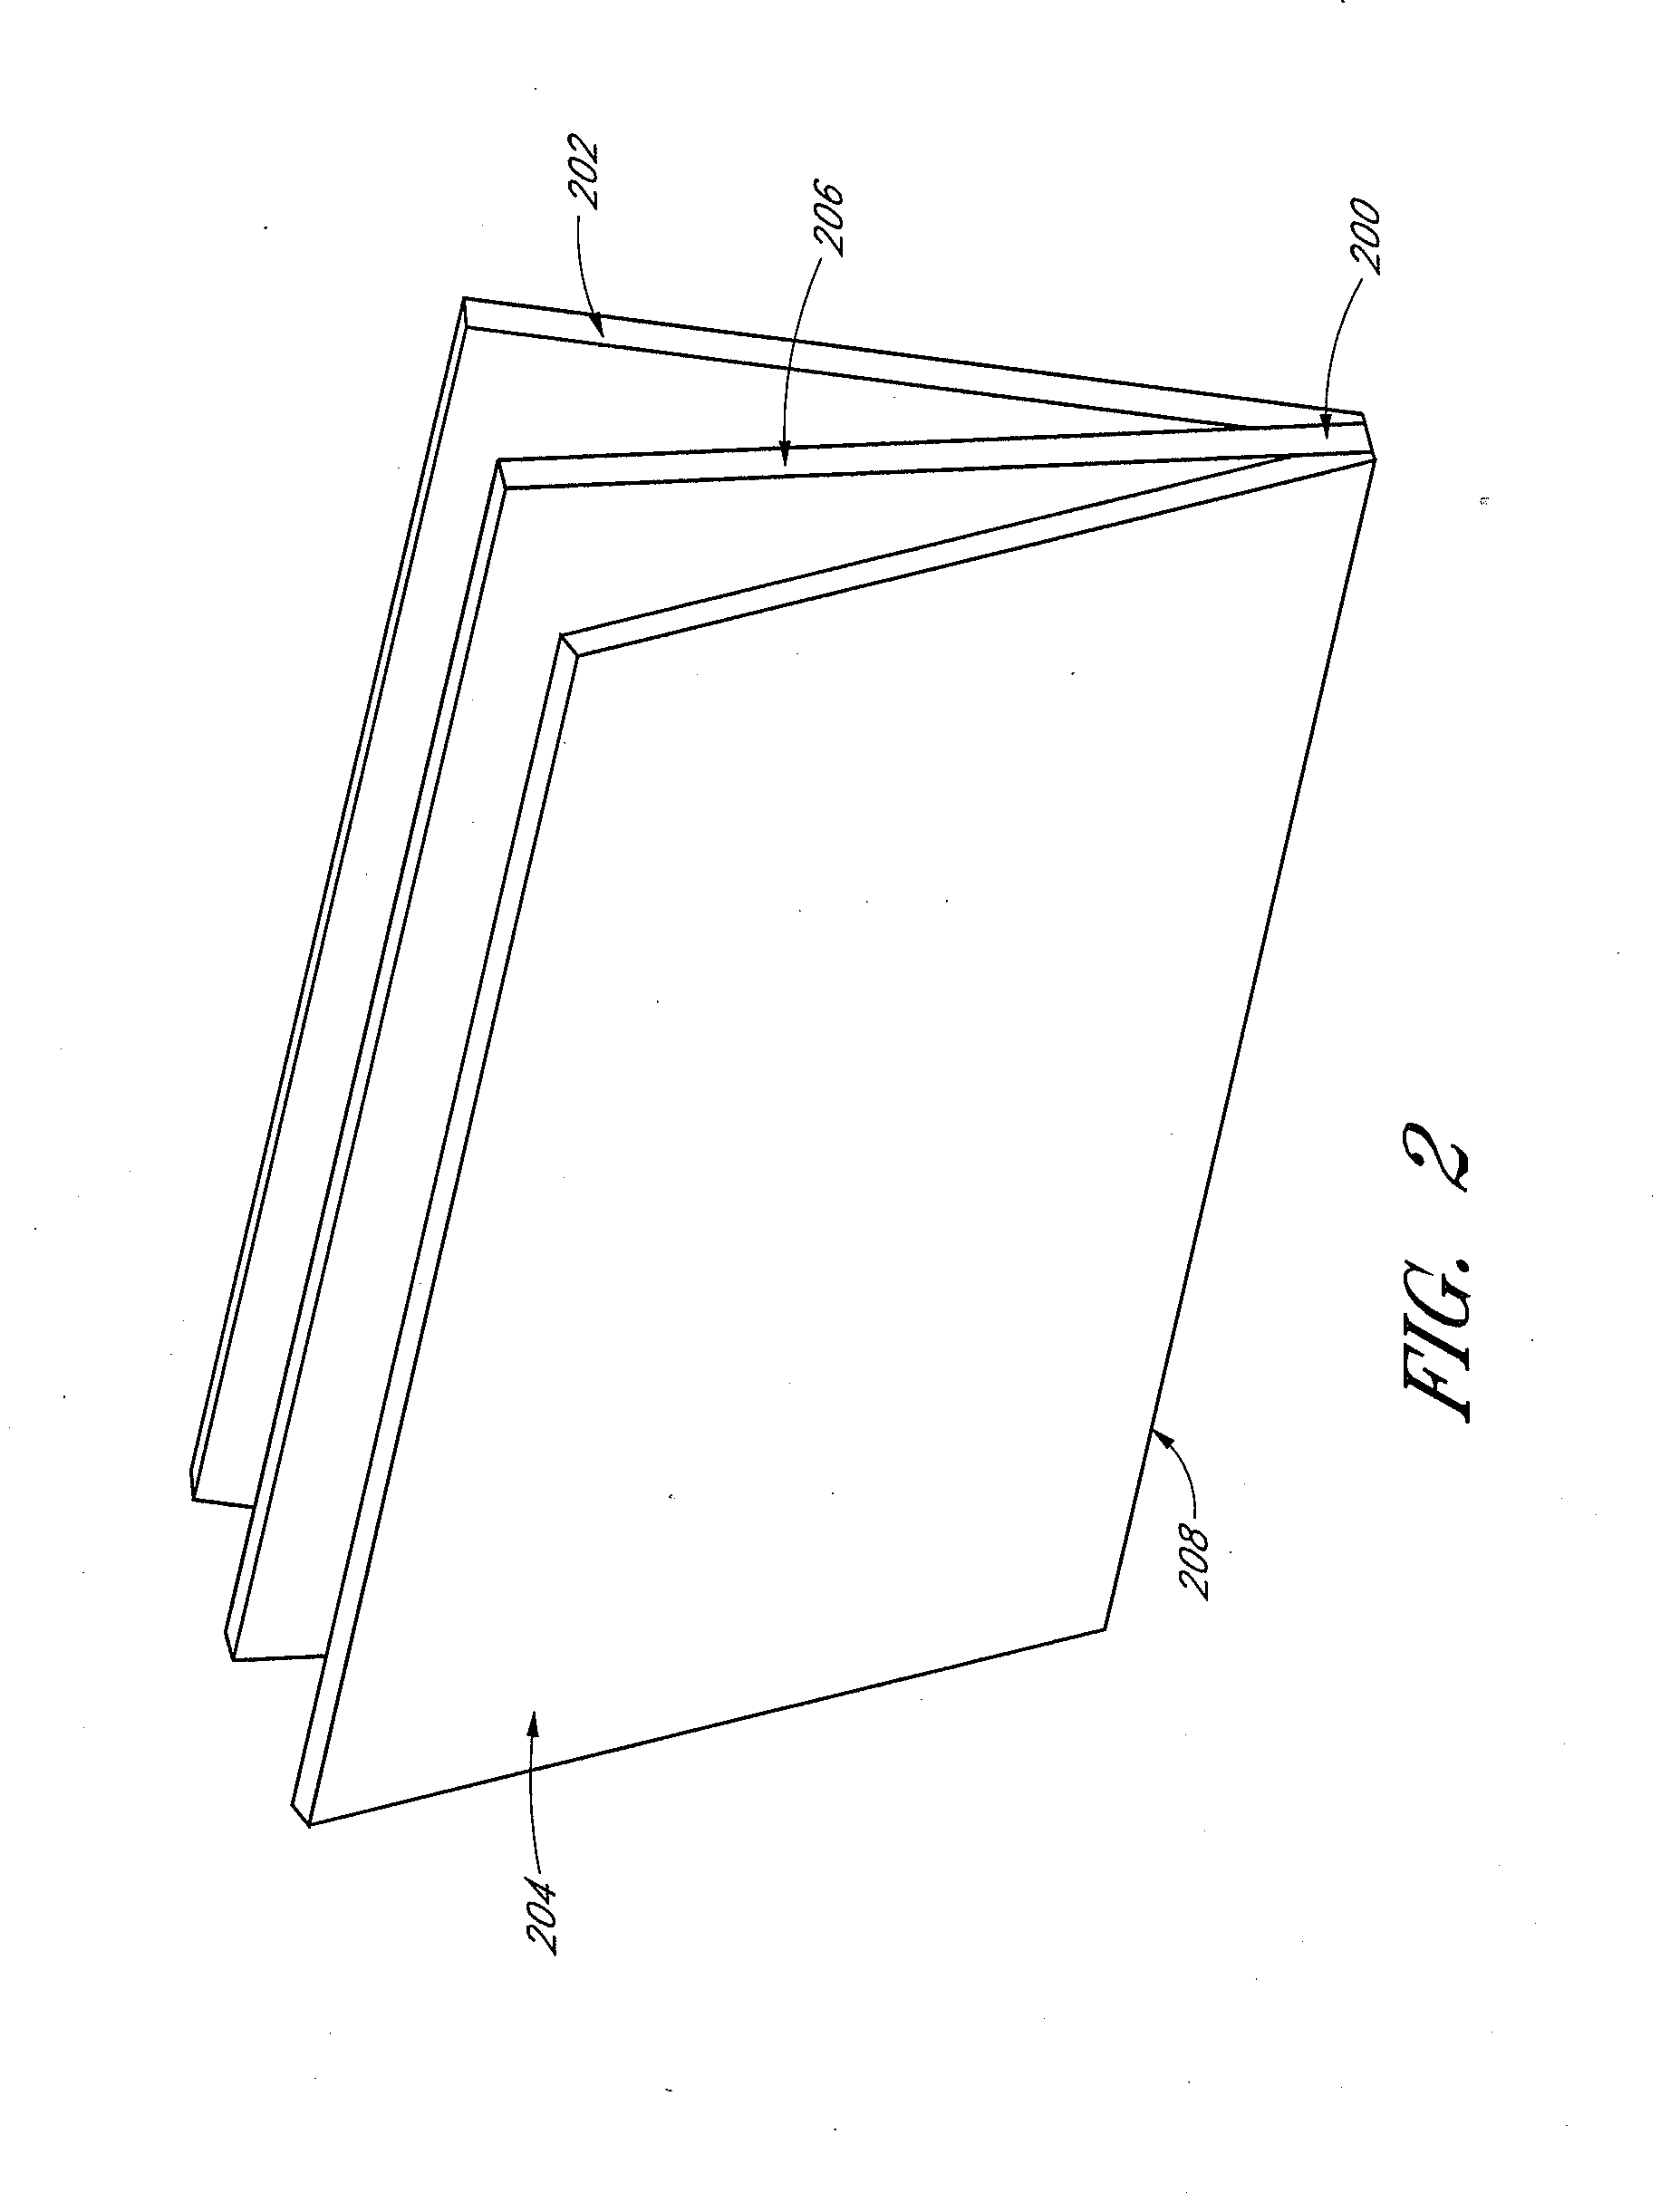 Anti-rotation device and method of use